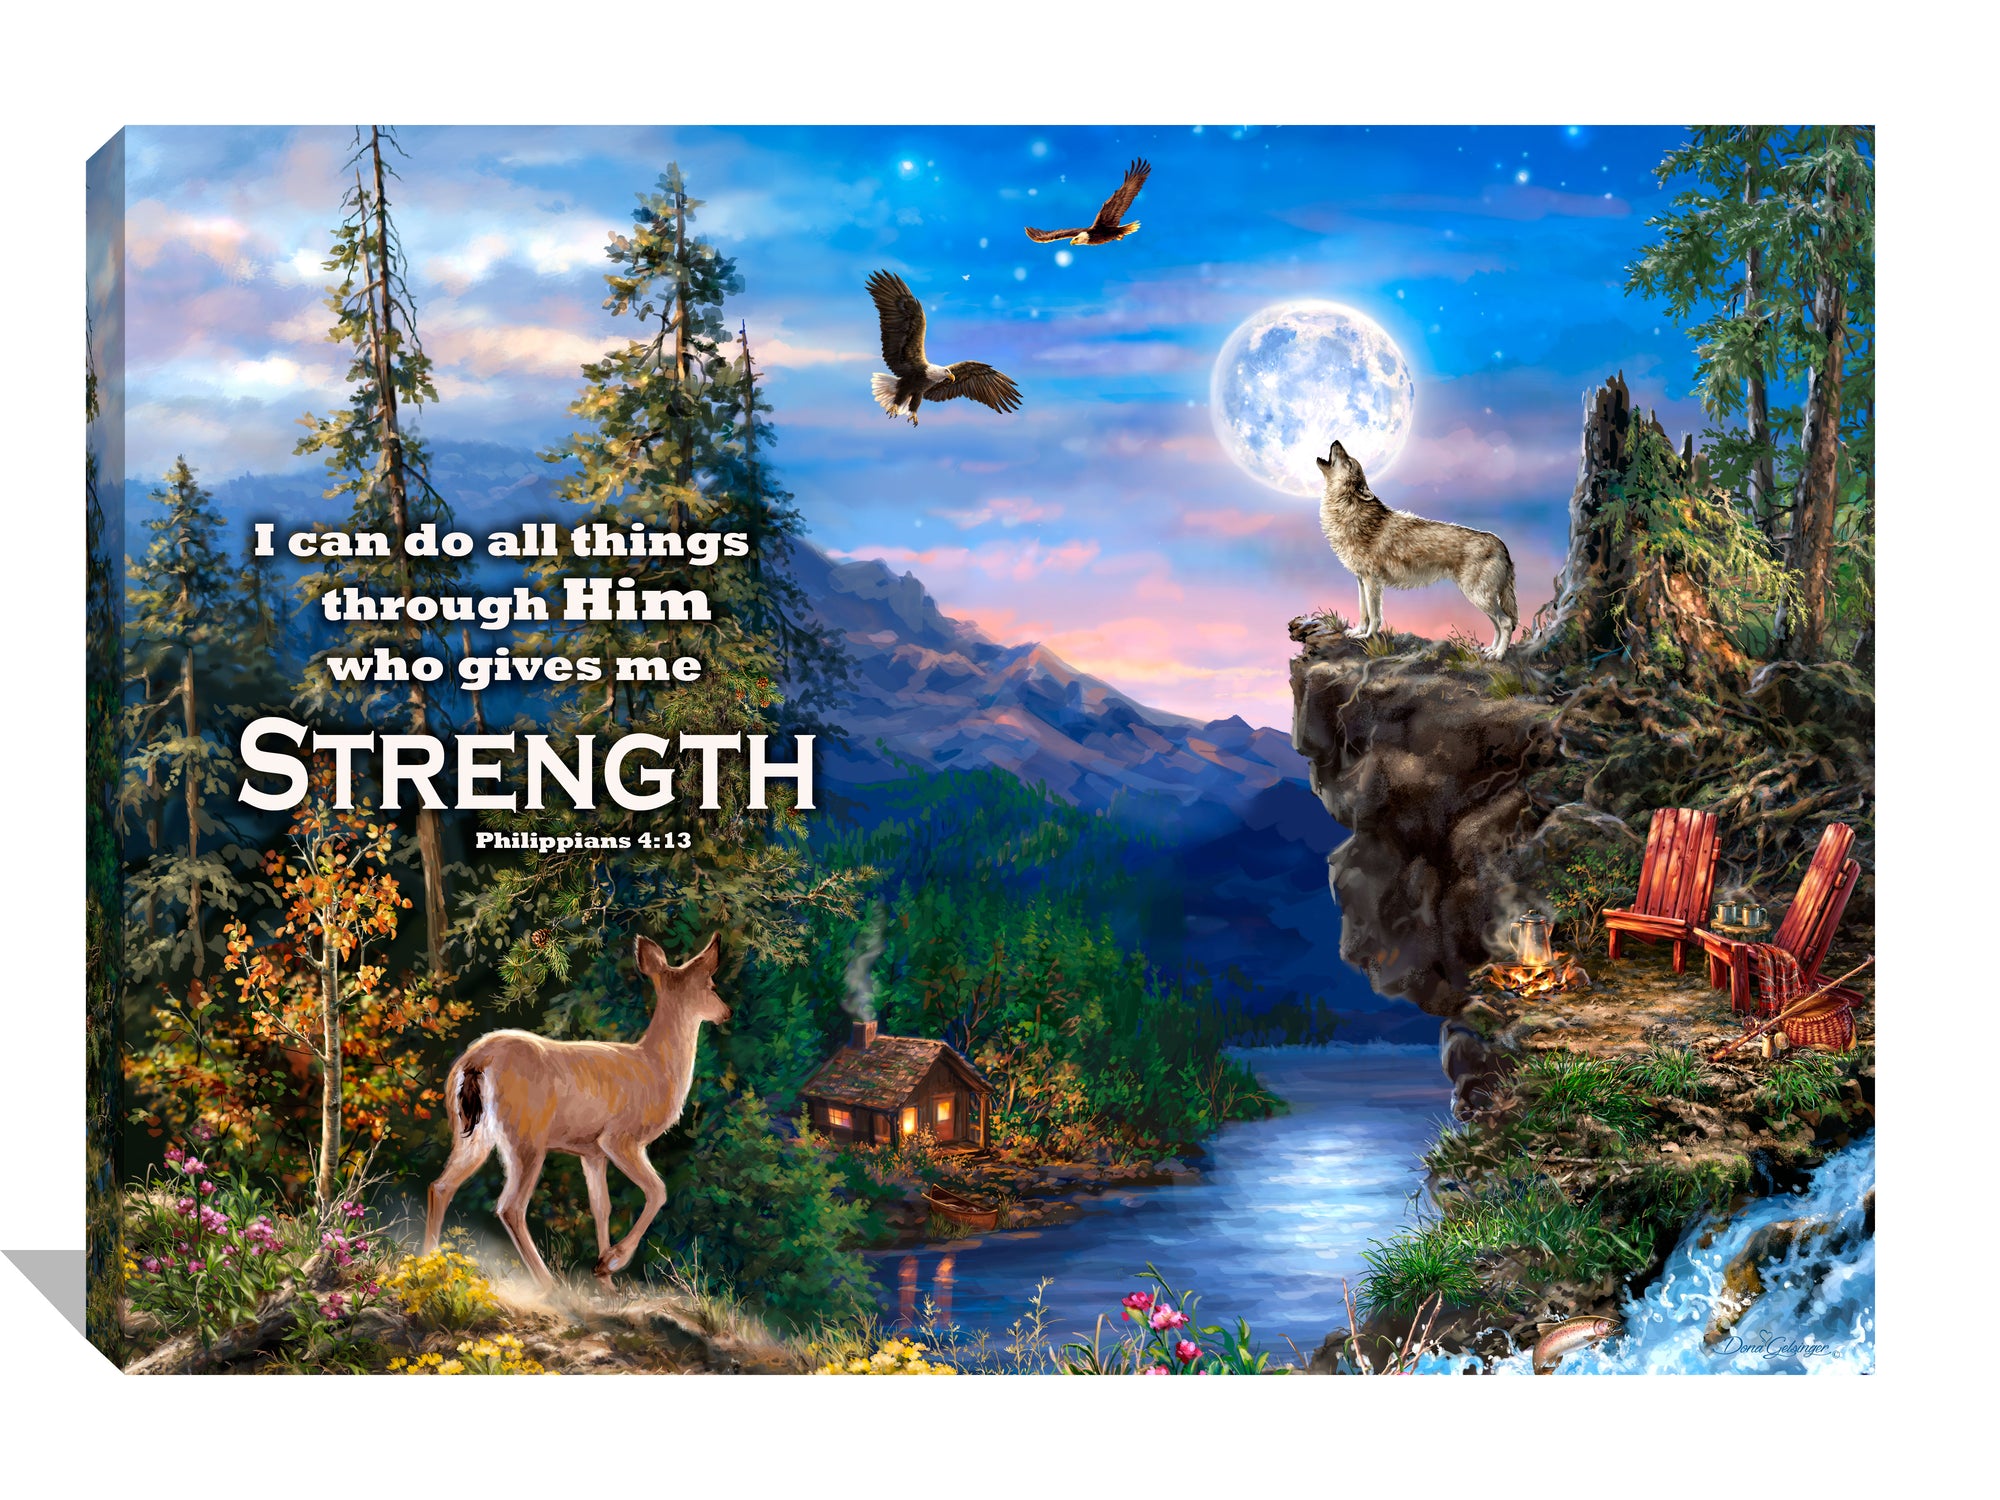 This stunning piece of art captures the essence of nature's beauty with its picturesque forest scene featuring a wolf, deer, owl, and bald eagles. The moon casts a gentle glow over the tranquil lake and cozy cabin, creating a sense of peace and serenity.  But this canvas wall art is more than just a breathtaking image of the great outdoors.